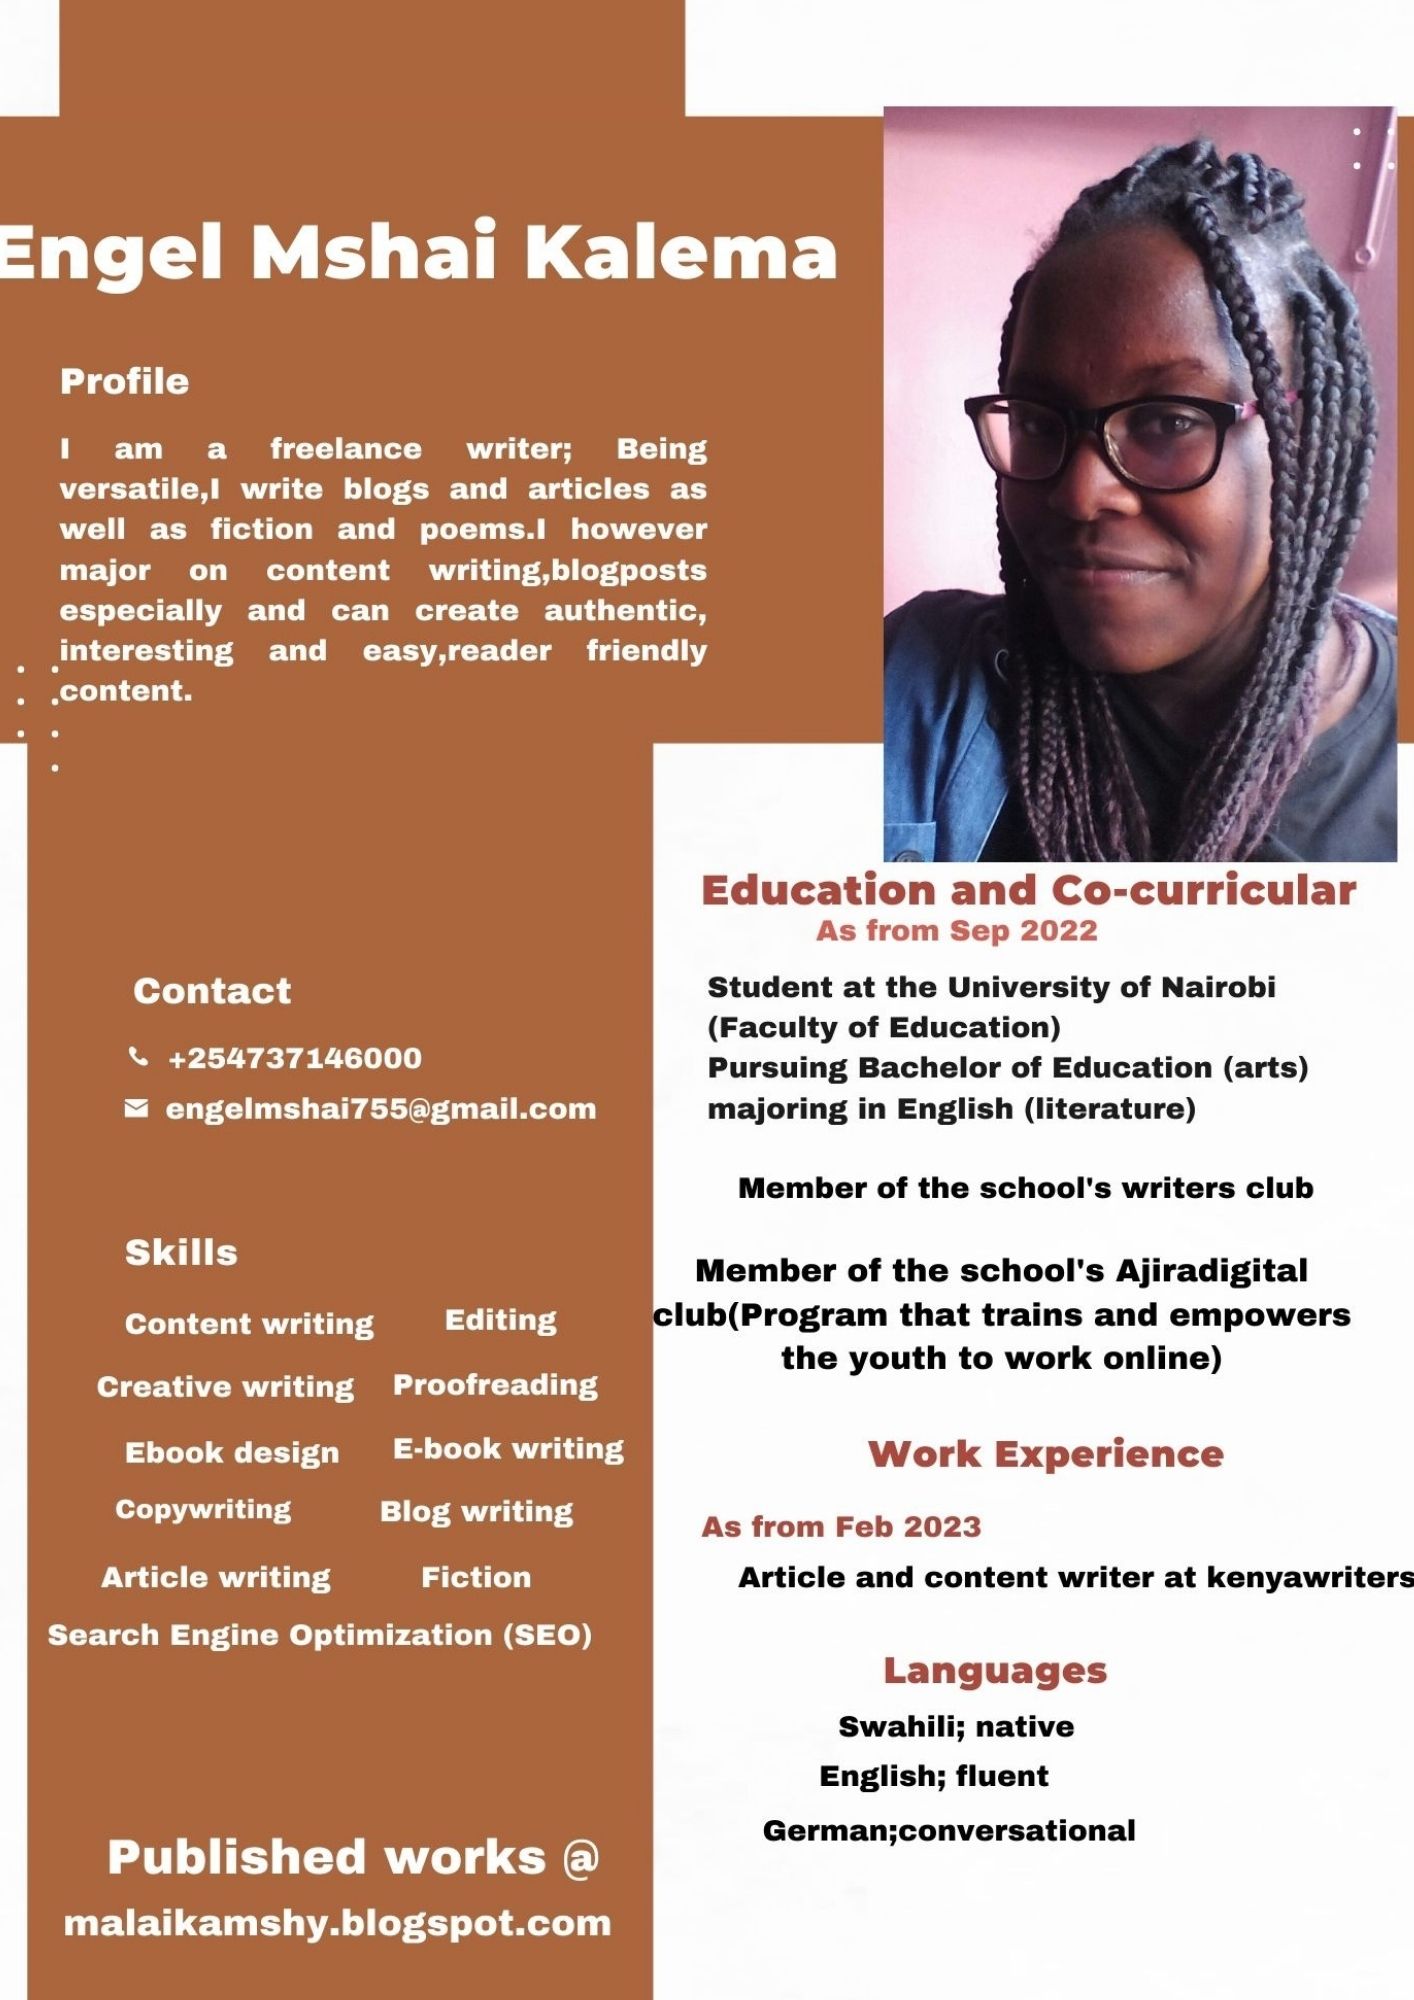 Engel Mshai Kalema

  

Profile

1 am a freelance writer; Being
versatile,l write blogs and articles as
well as fiction and poems.l however
major on content writing,blogposts
especially and can create authentic,
Jnteresting and easy,reader friendly

) content.
Education and Co-curricular
As from Sep 2022
Contact Student at the University of Nairobi
(Faculty of Education)
& +254737146000 Pursuing Bachelor of Education (arts)
& engelmshai755@gmail.com majoring in English (literature)
Member of the school's writers club
SLU Member of the school's Ajiradigital
Content writing Editing lub(Program that trains and empowers

the youth to work online)

Creative writing Proofreading
Ebook design E-book writing Work Experience
Rall a bth As from Feb 2023

Article writing Fiction Article and content writer at kenyawriters

Search Engine Optimization (SEO)
Languages

Swahili; native
English; fluent

Germanj;conversational

Published works @

malaikamshy.blogspot.com